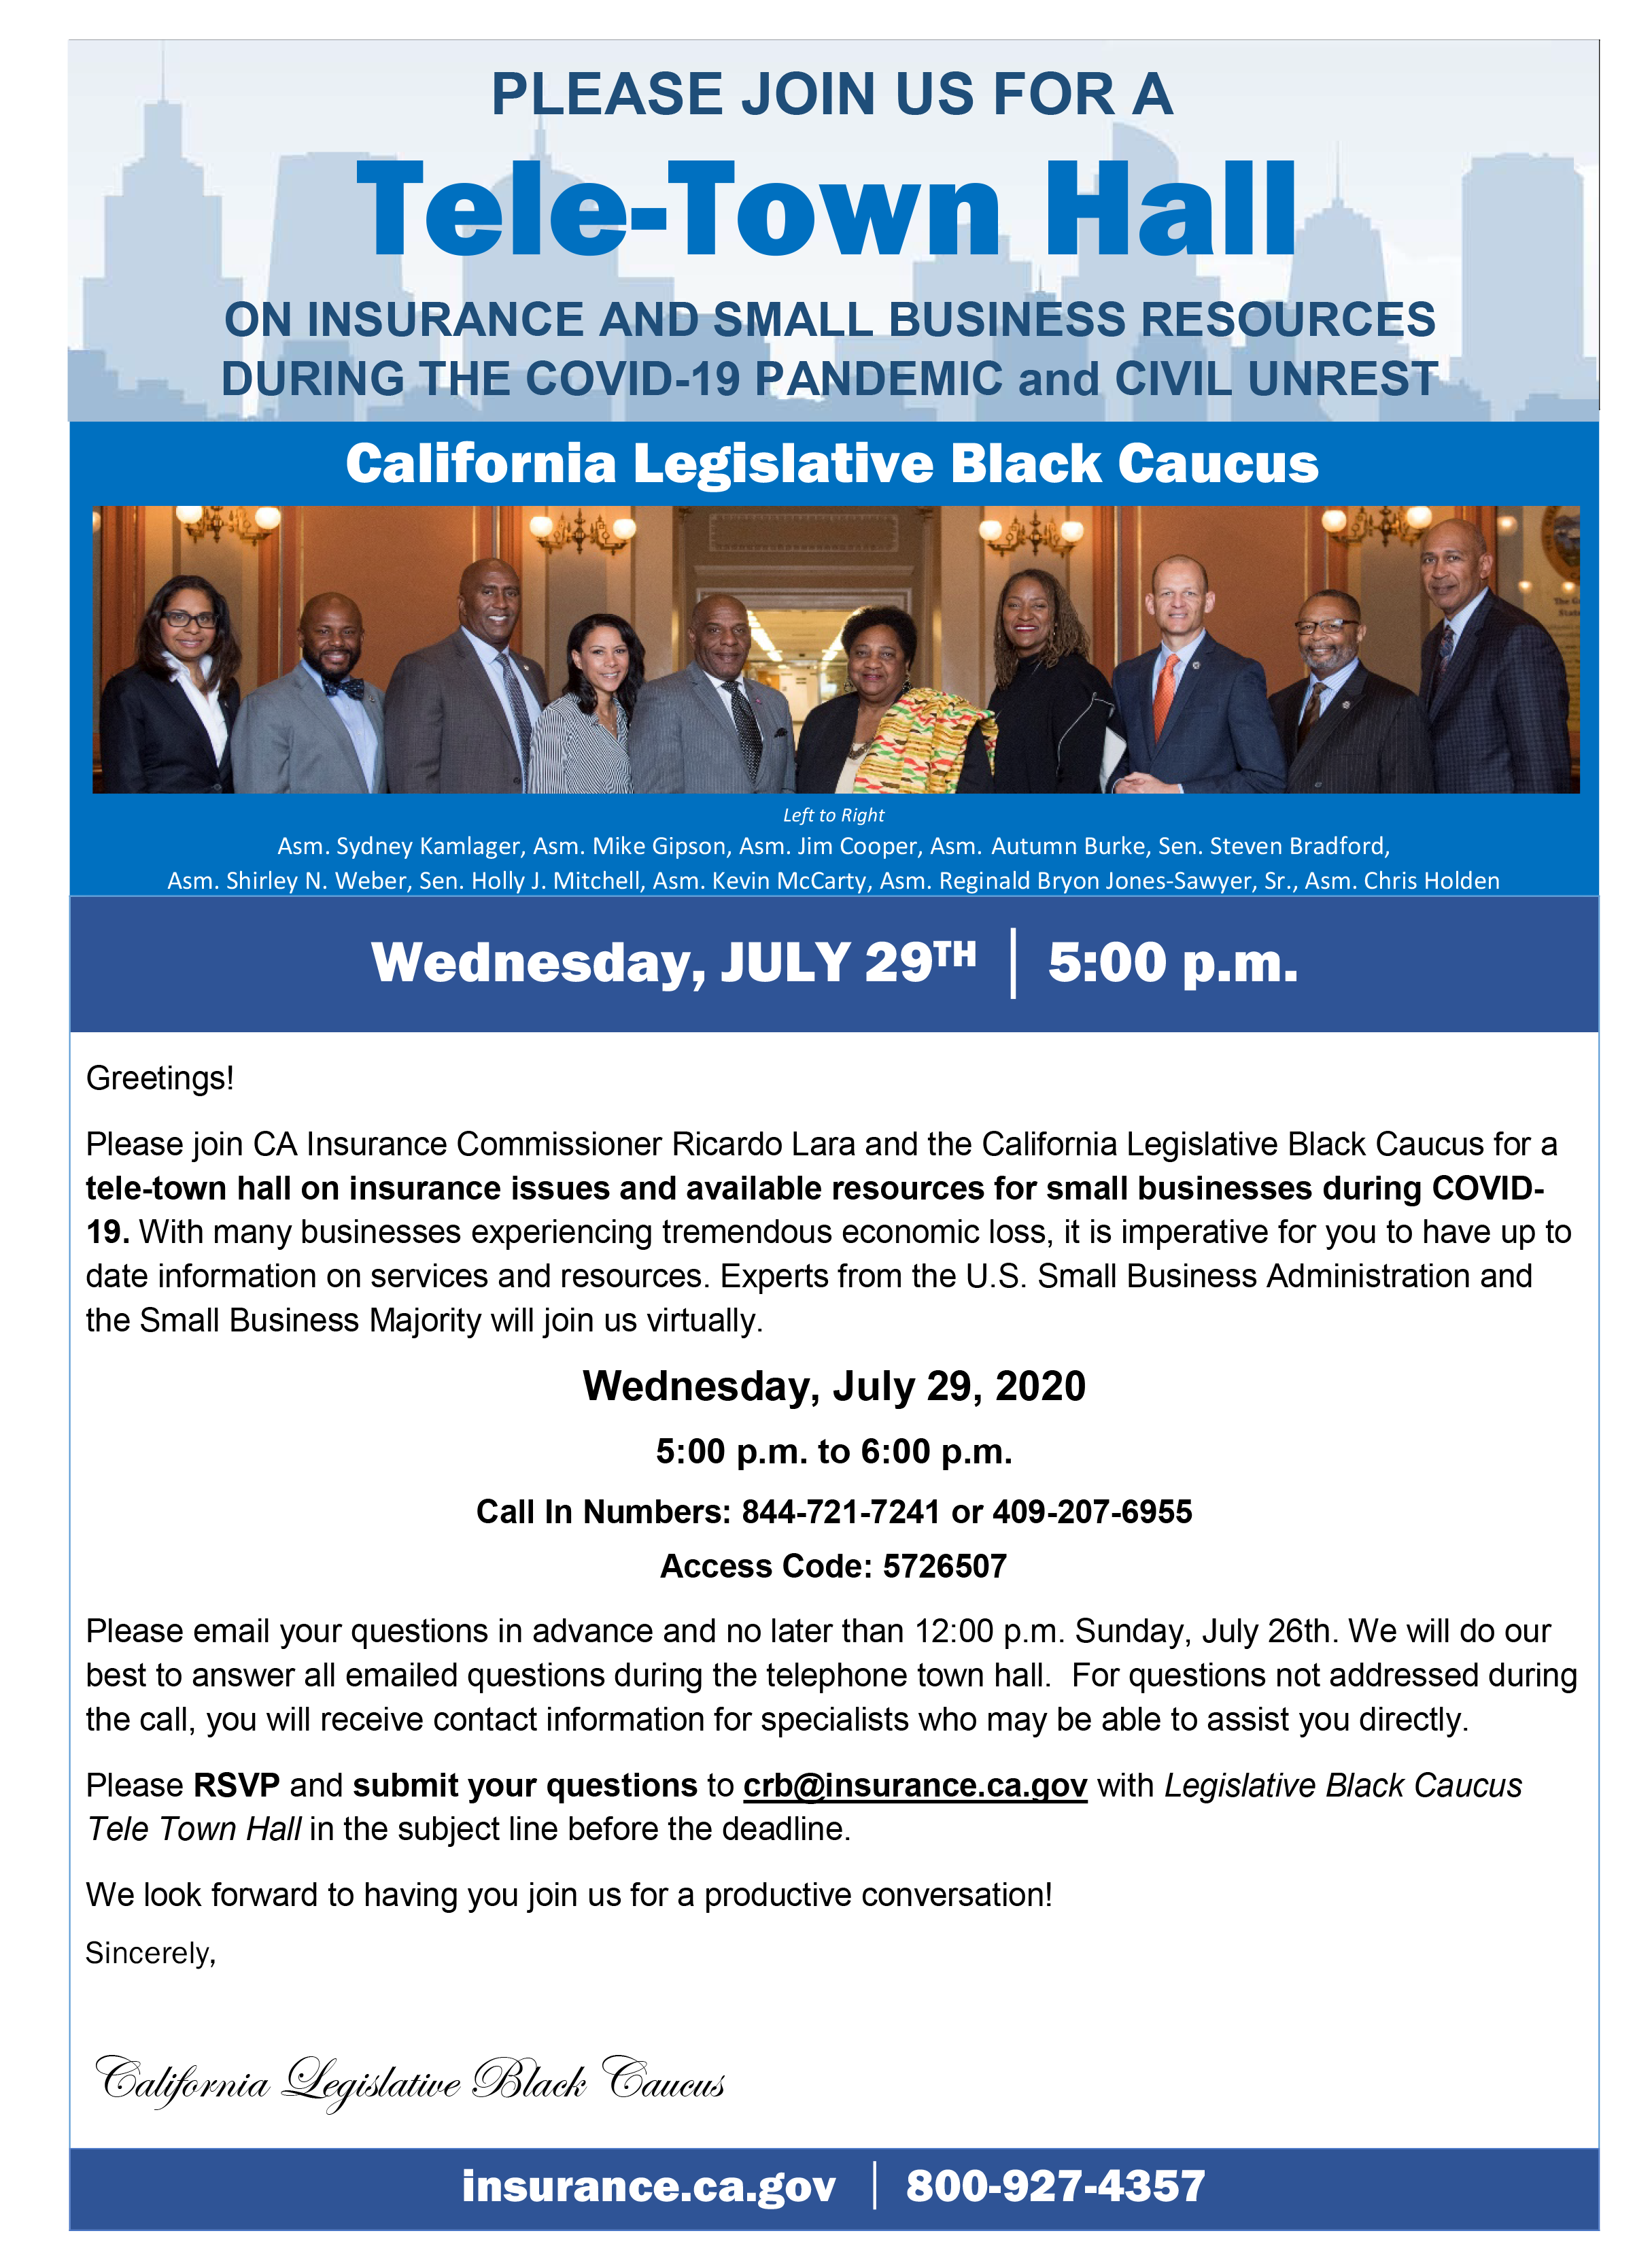 Join the California Legislative Black Caucus and insurance commissioner, Ricardo Lara, Experts from the U.S. Small Business Administration and the Small Business Majority will join us virtually. Wednesday, July 29, 2020, 5:00 p.m. to 6:00 p.m. 